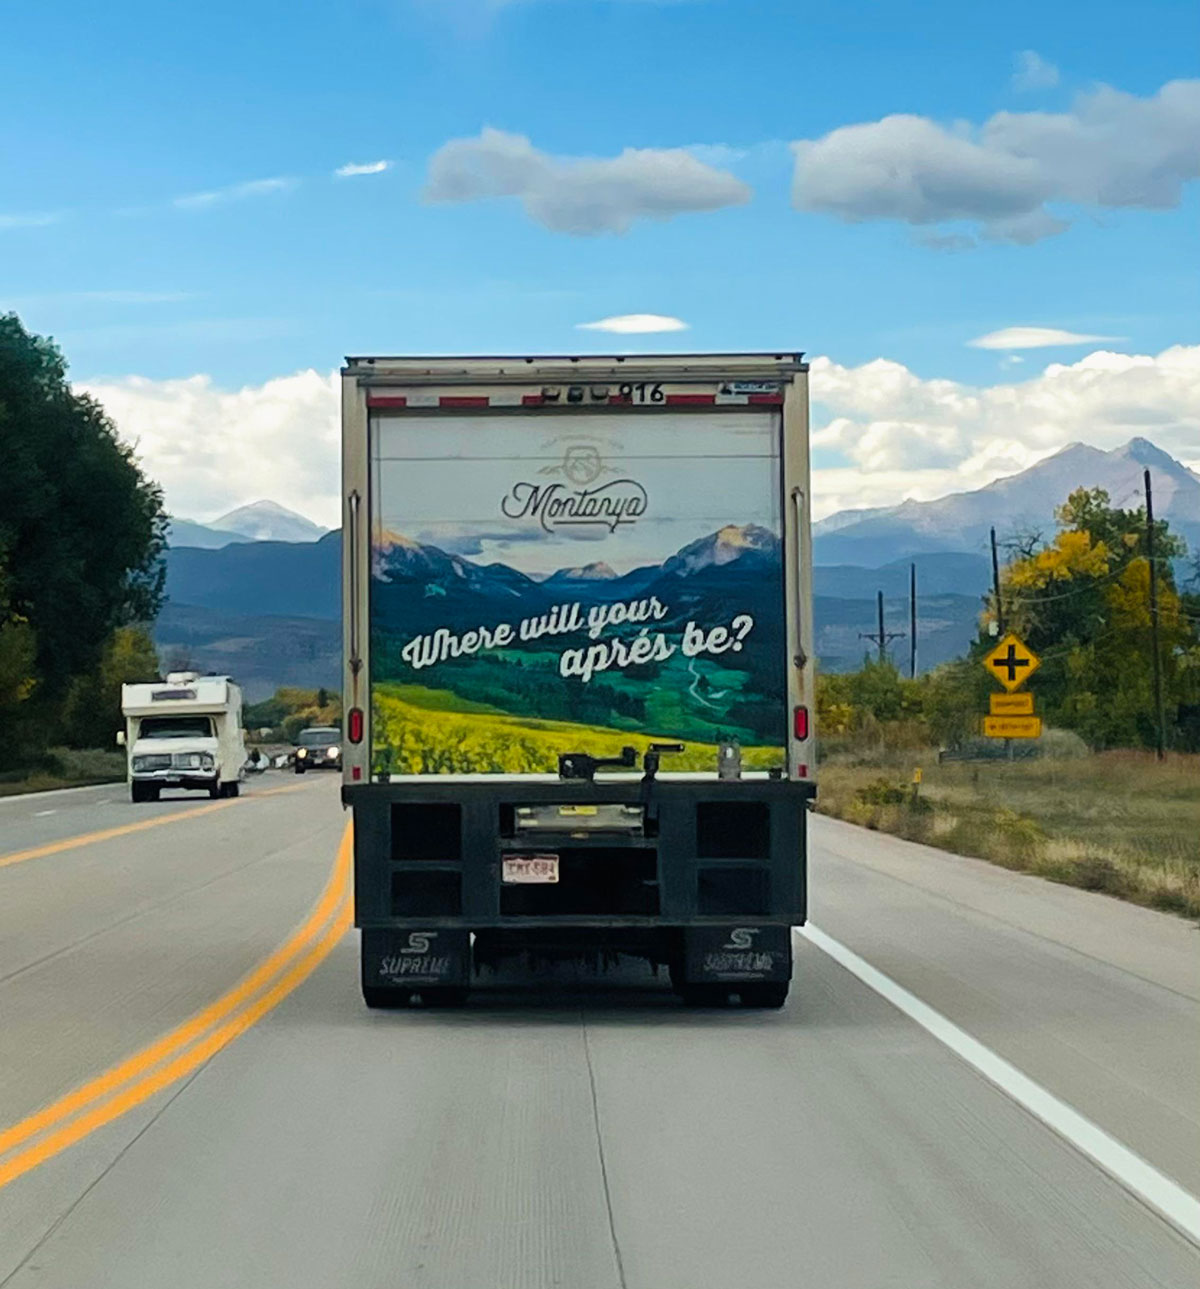 The truck in front of us lined up perfectly with the mountains!